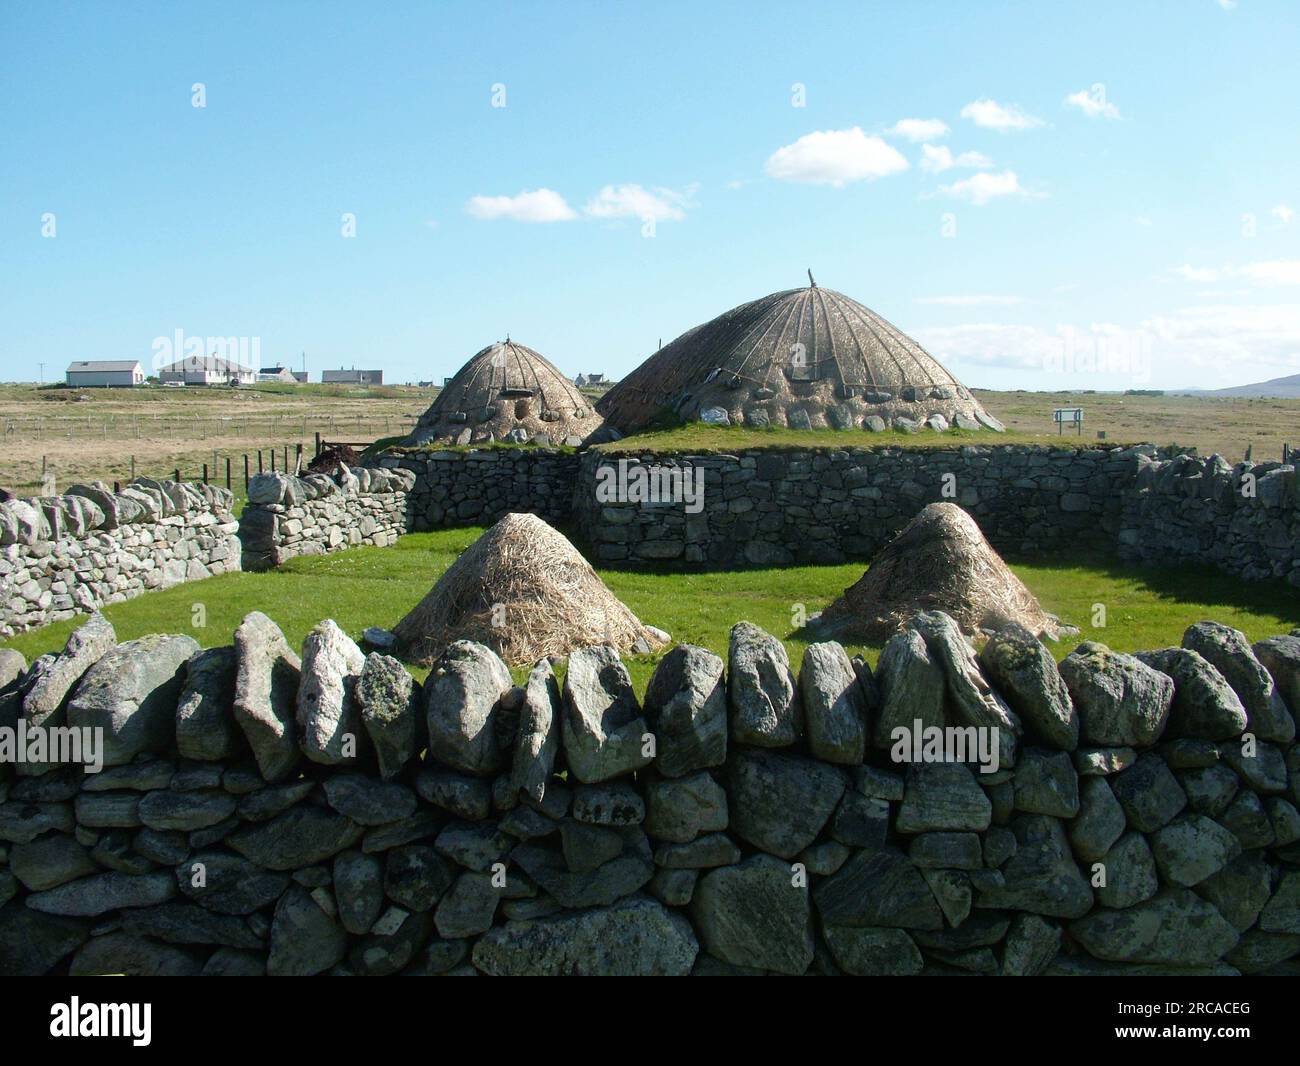 The Blackhouse, Arnol, Bragar, Isle of Lewis,roofs thatched with cereal straw over turf and thick, stone-lined walls with an earthen core. Roof timber Stock Photo